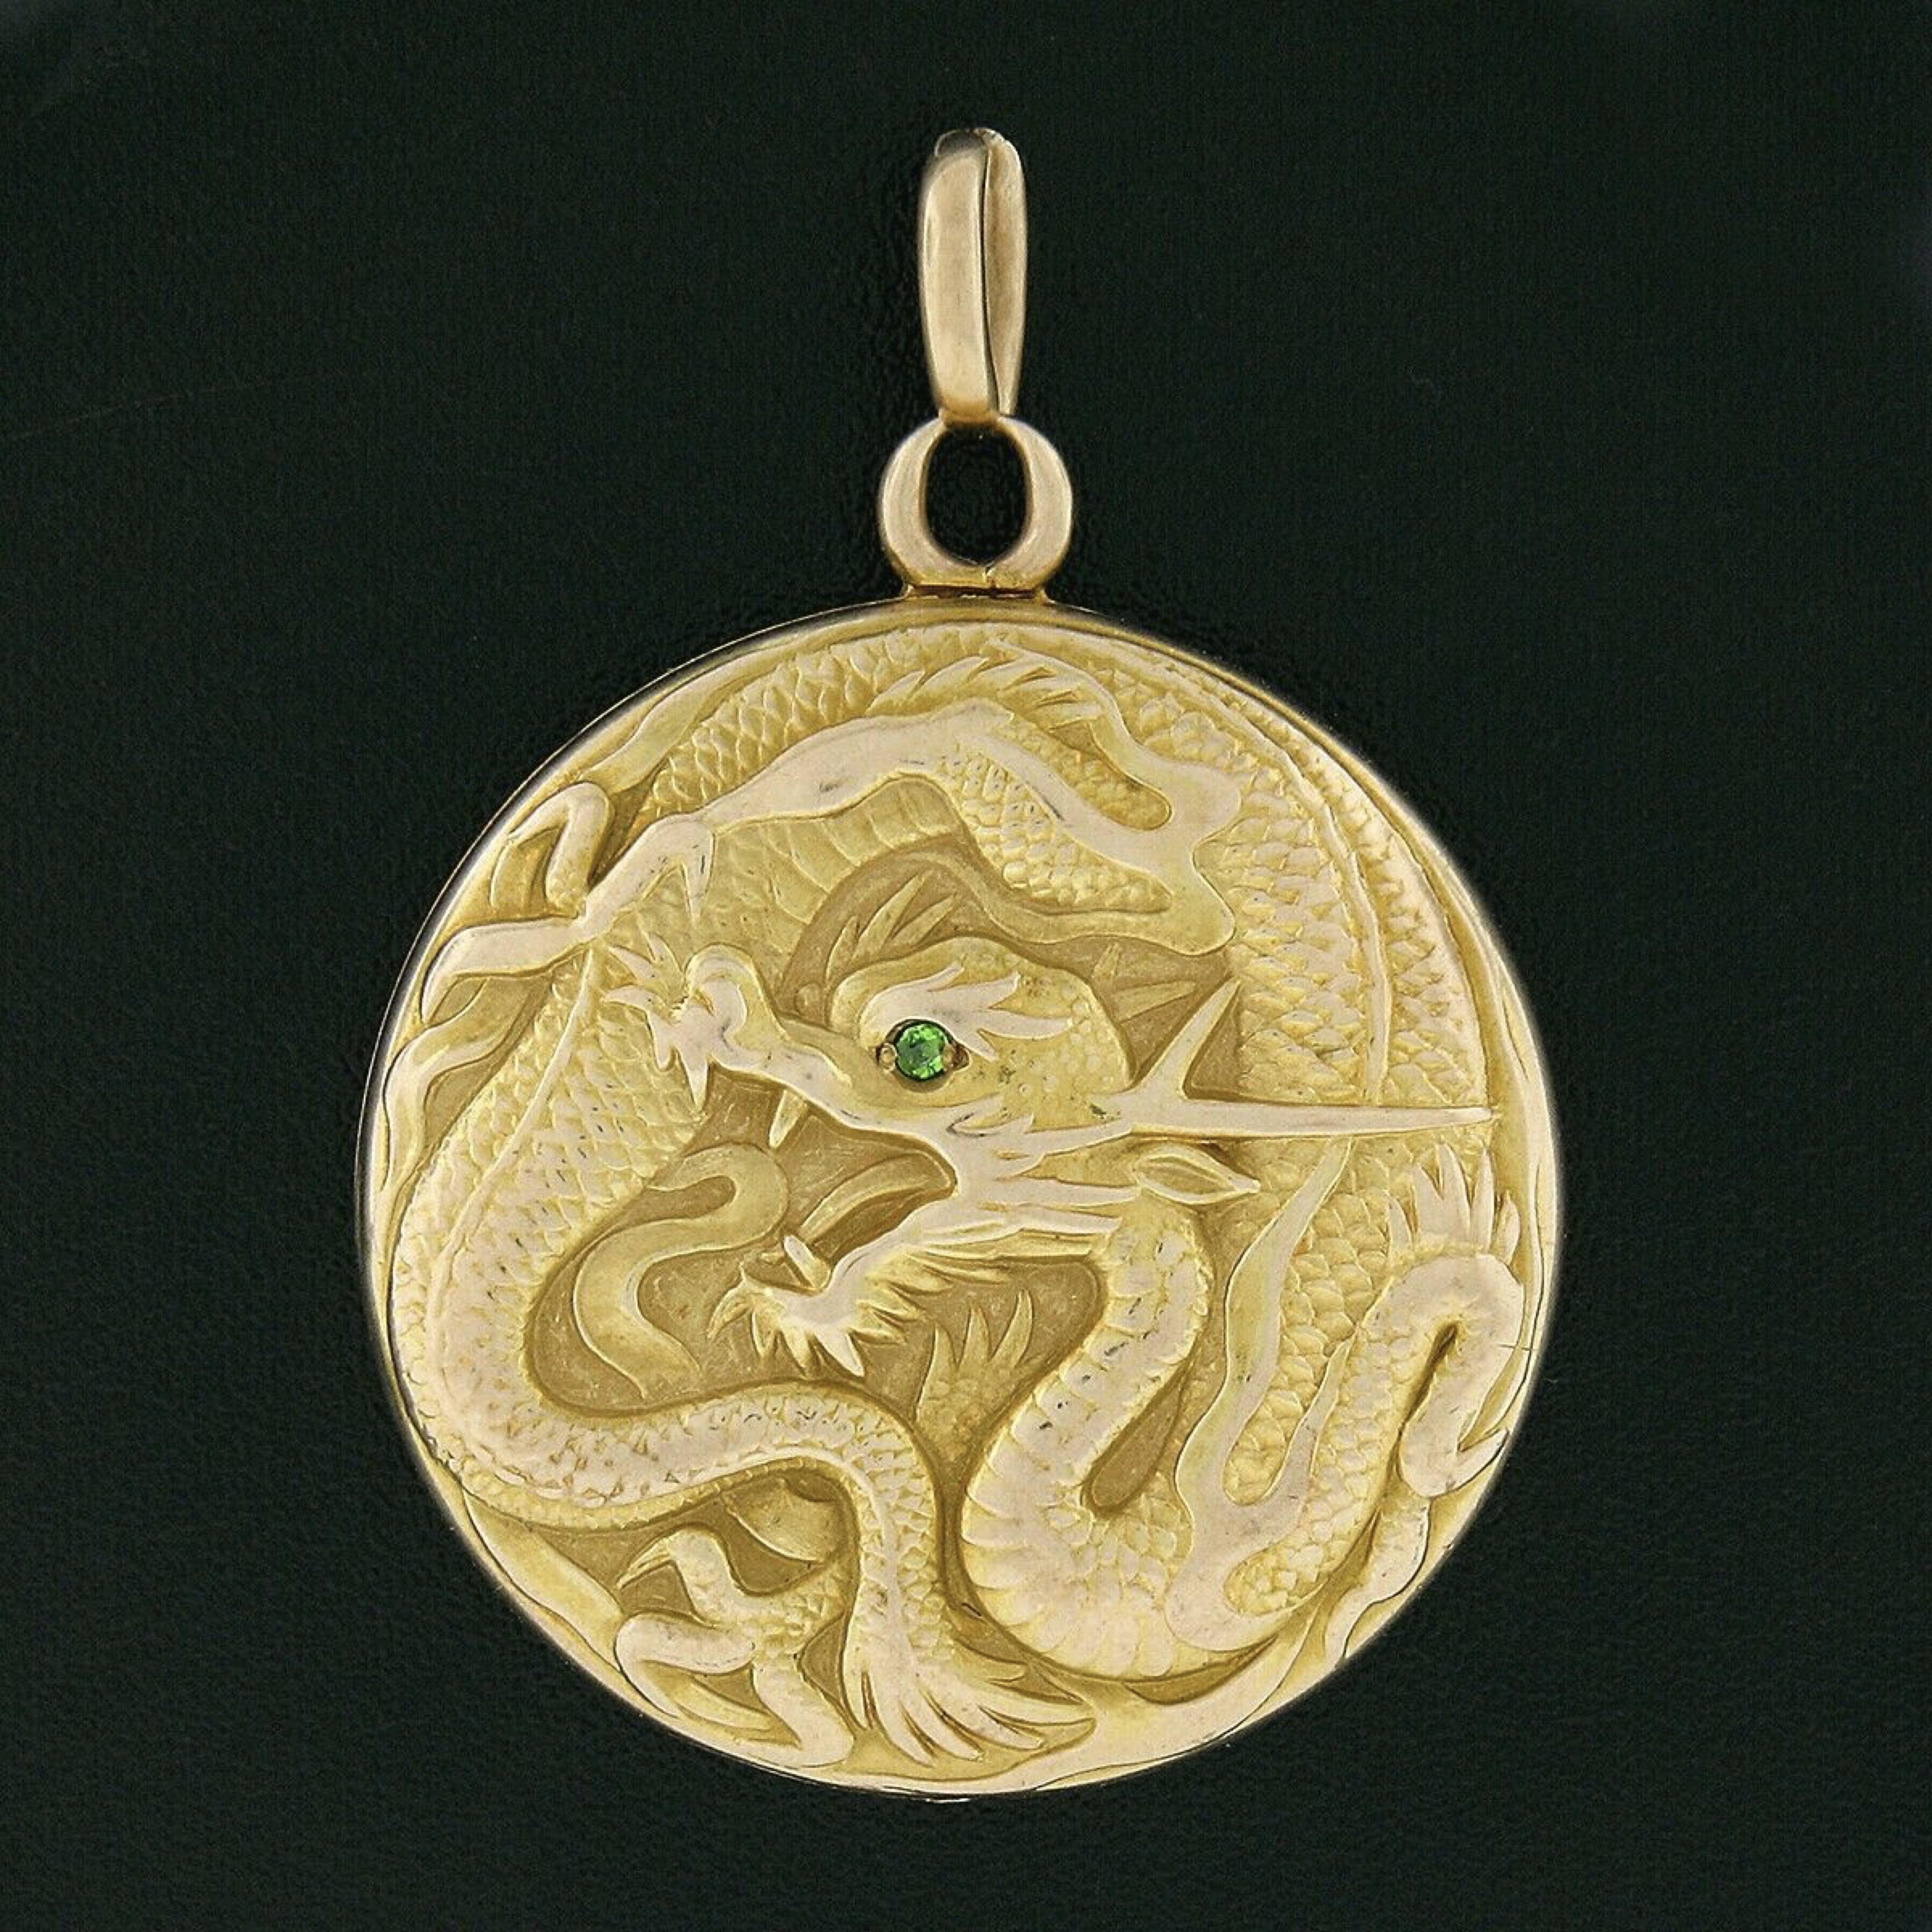 This magnificent antique medallion locket charm/pendant is crafted in solid 14k yellow gold with a rosy color appearance due to the original finish and patina which have been preserved on it throughout the years. It features a stunning dragon design